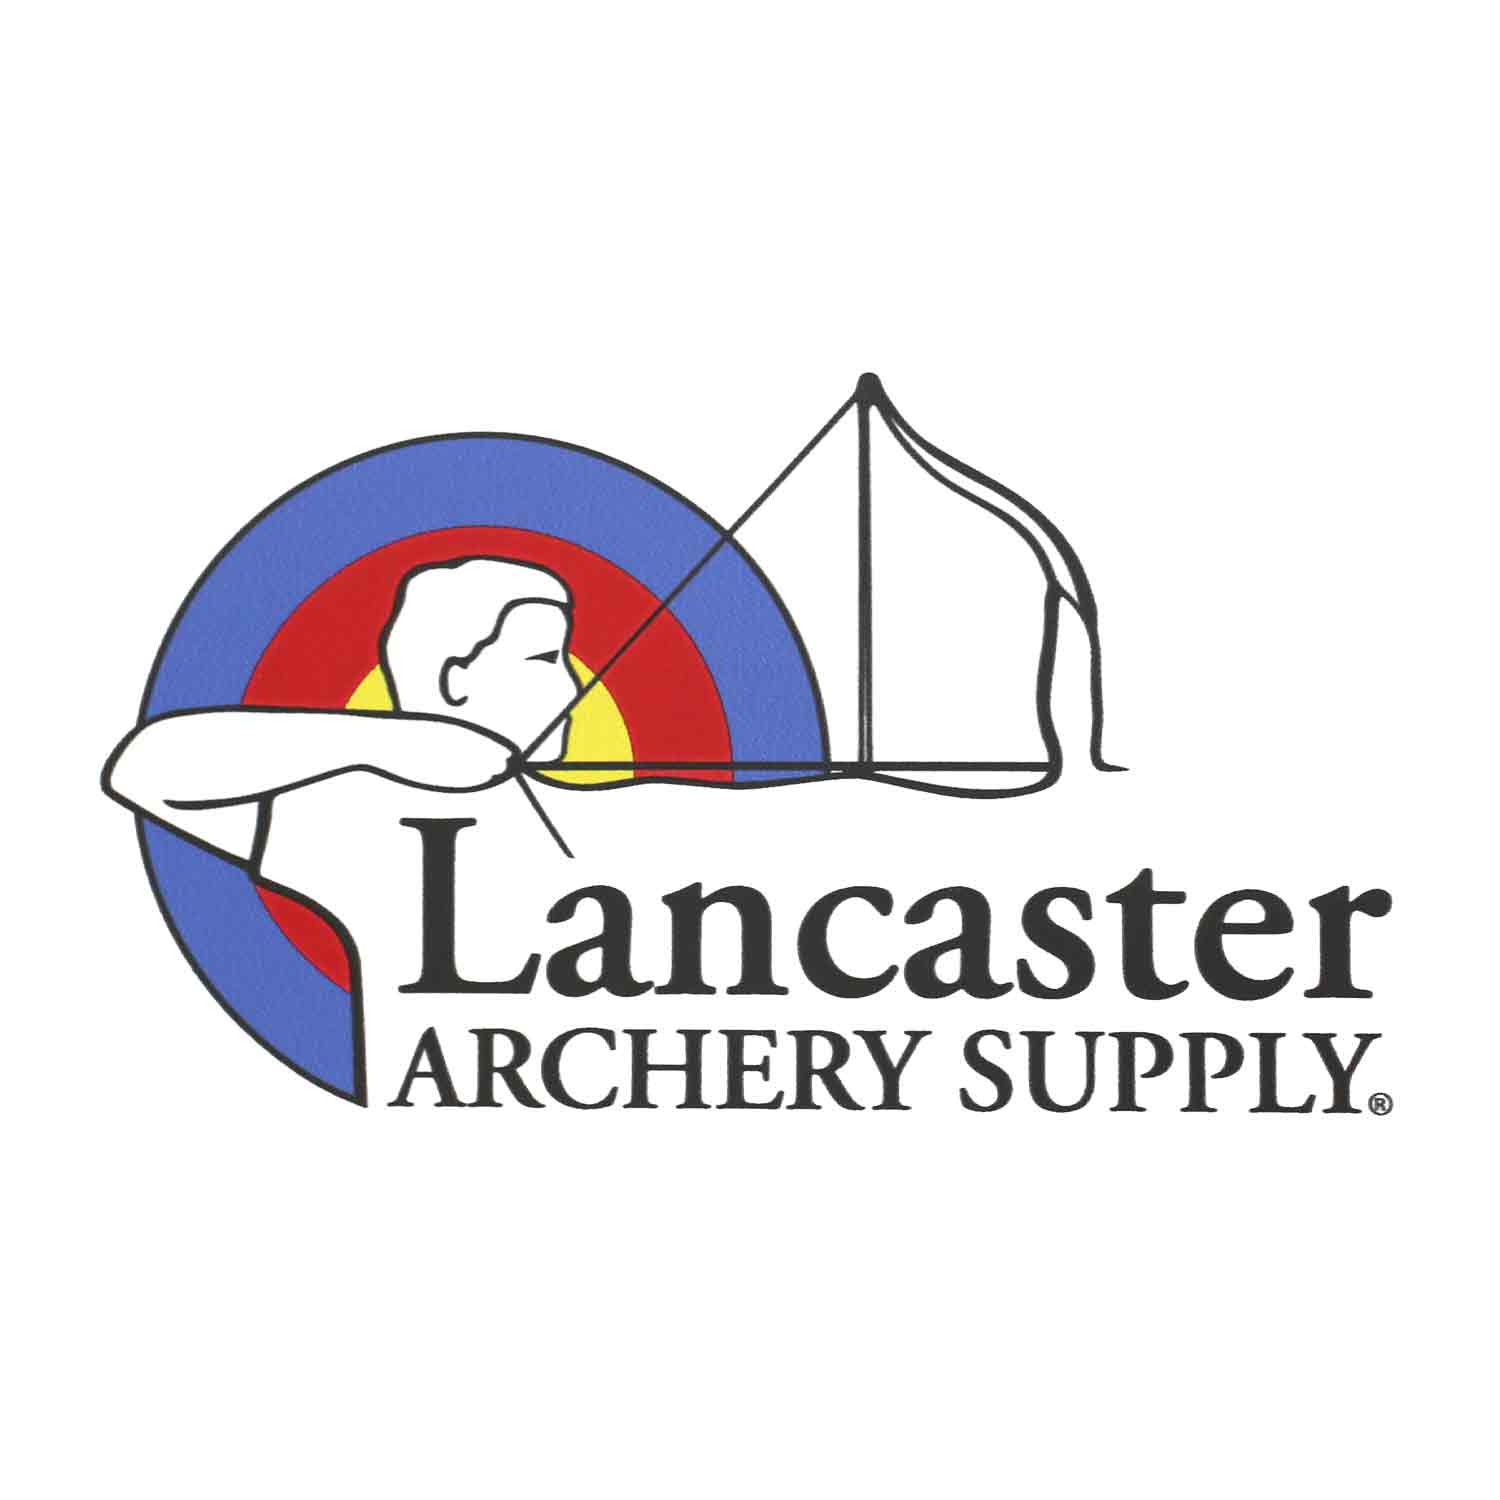 Lancaster Archery Supply Decal (Large)